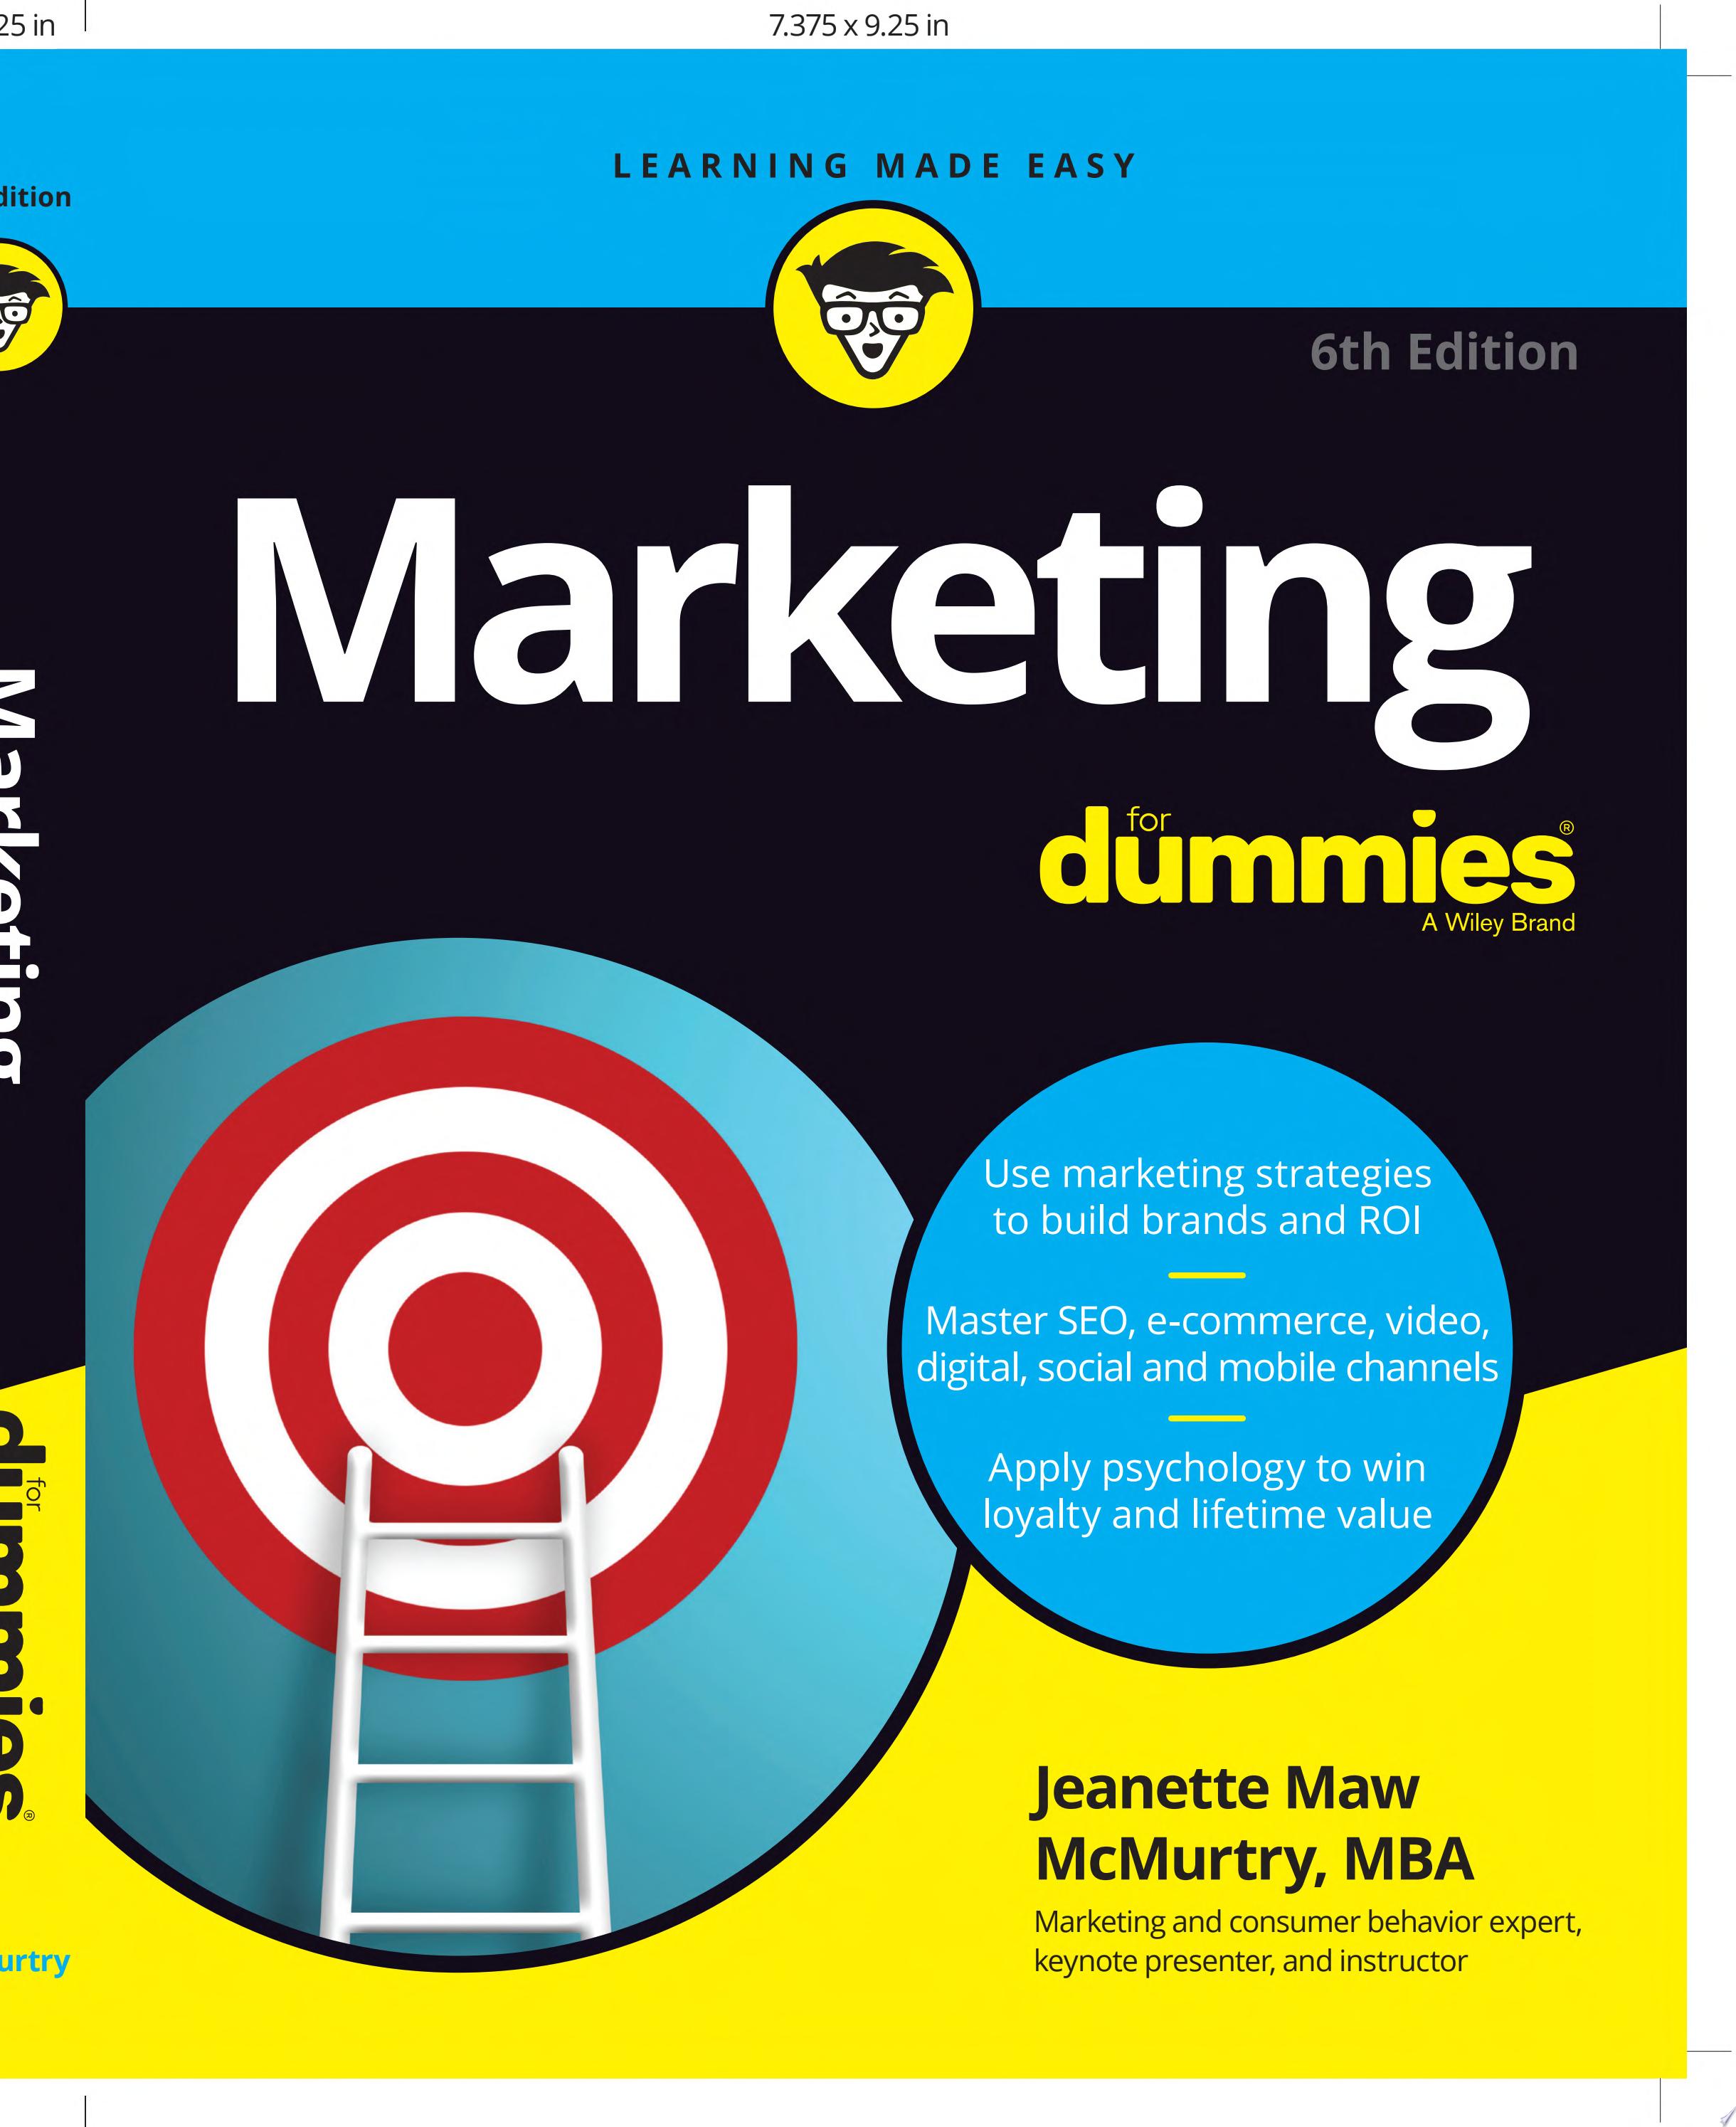 Image for "Marketing For Dummies"